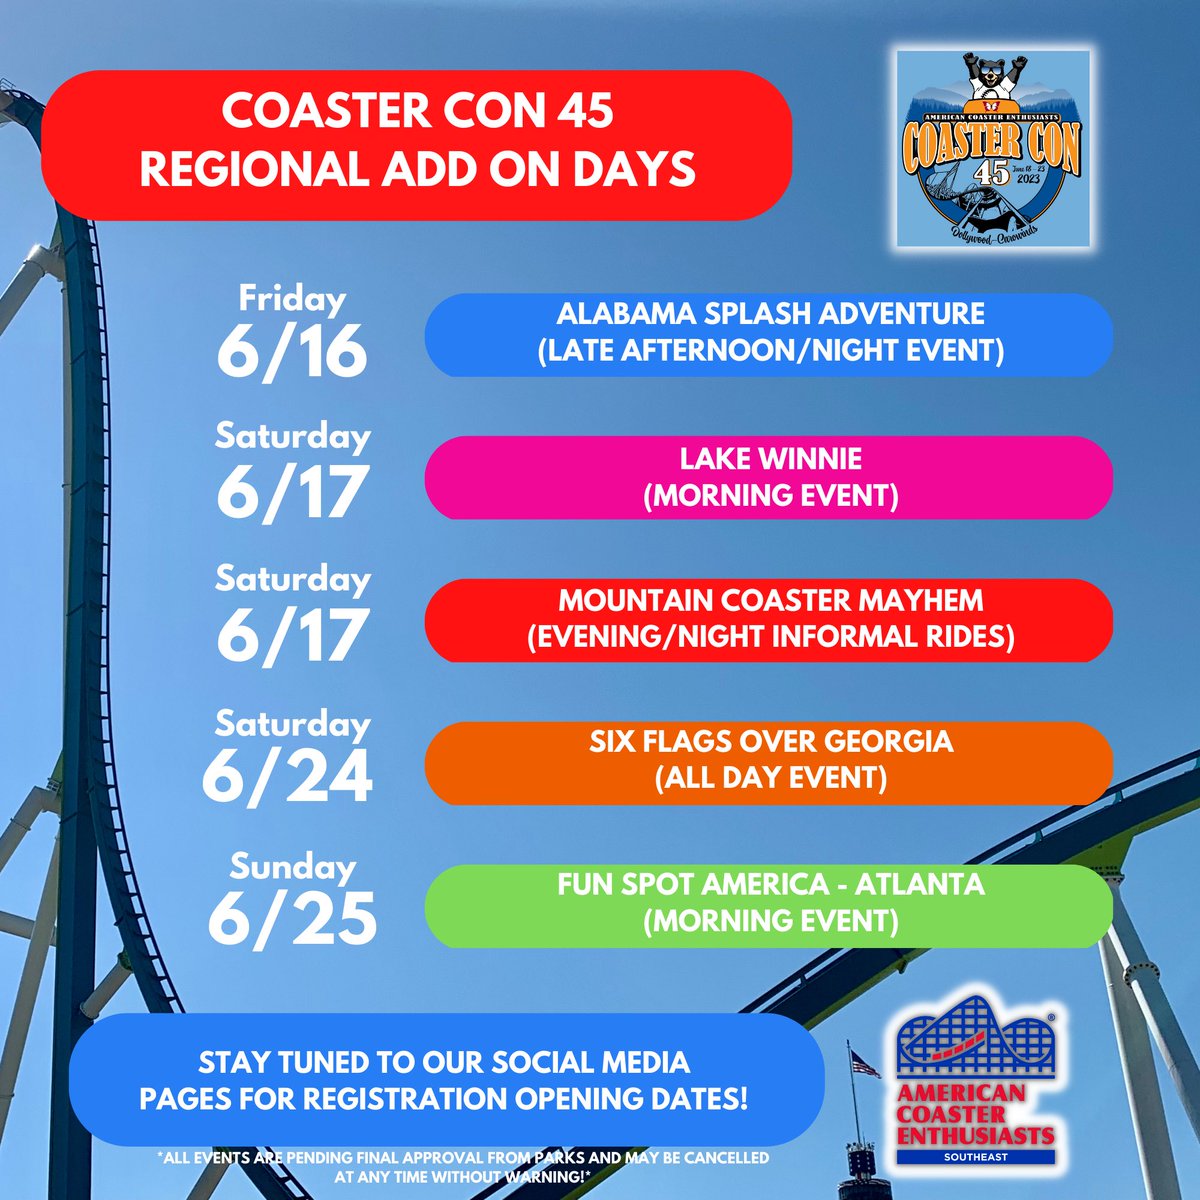 Here is the TENTATIVE plan for our regional Coaster Con add on days this June. Use this to plan your lodging and flights, if needed. Further details, including event schedules and pricing, will be release at a later date.